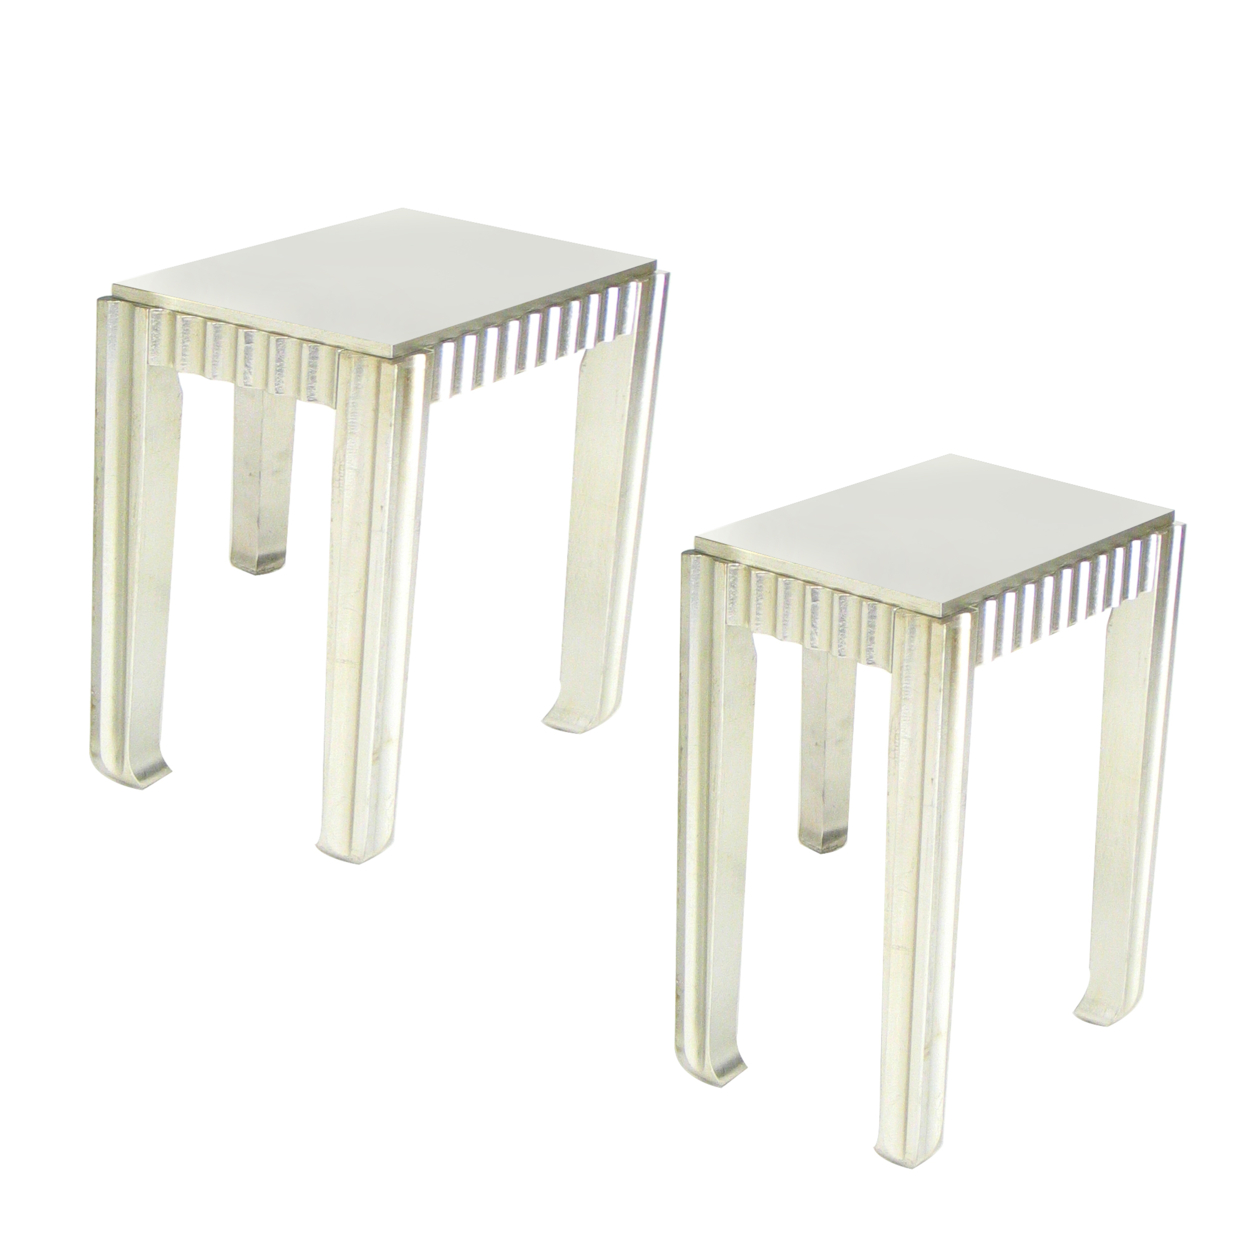 Rectangular Wooden Nesting Table With Smooth Top, Set Of 2, Silver- Saltoro Sherpi